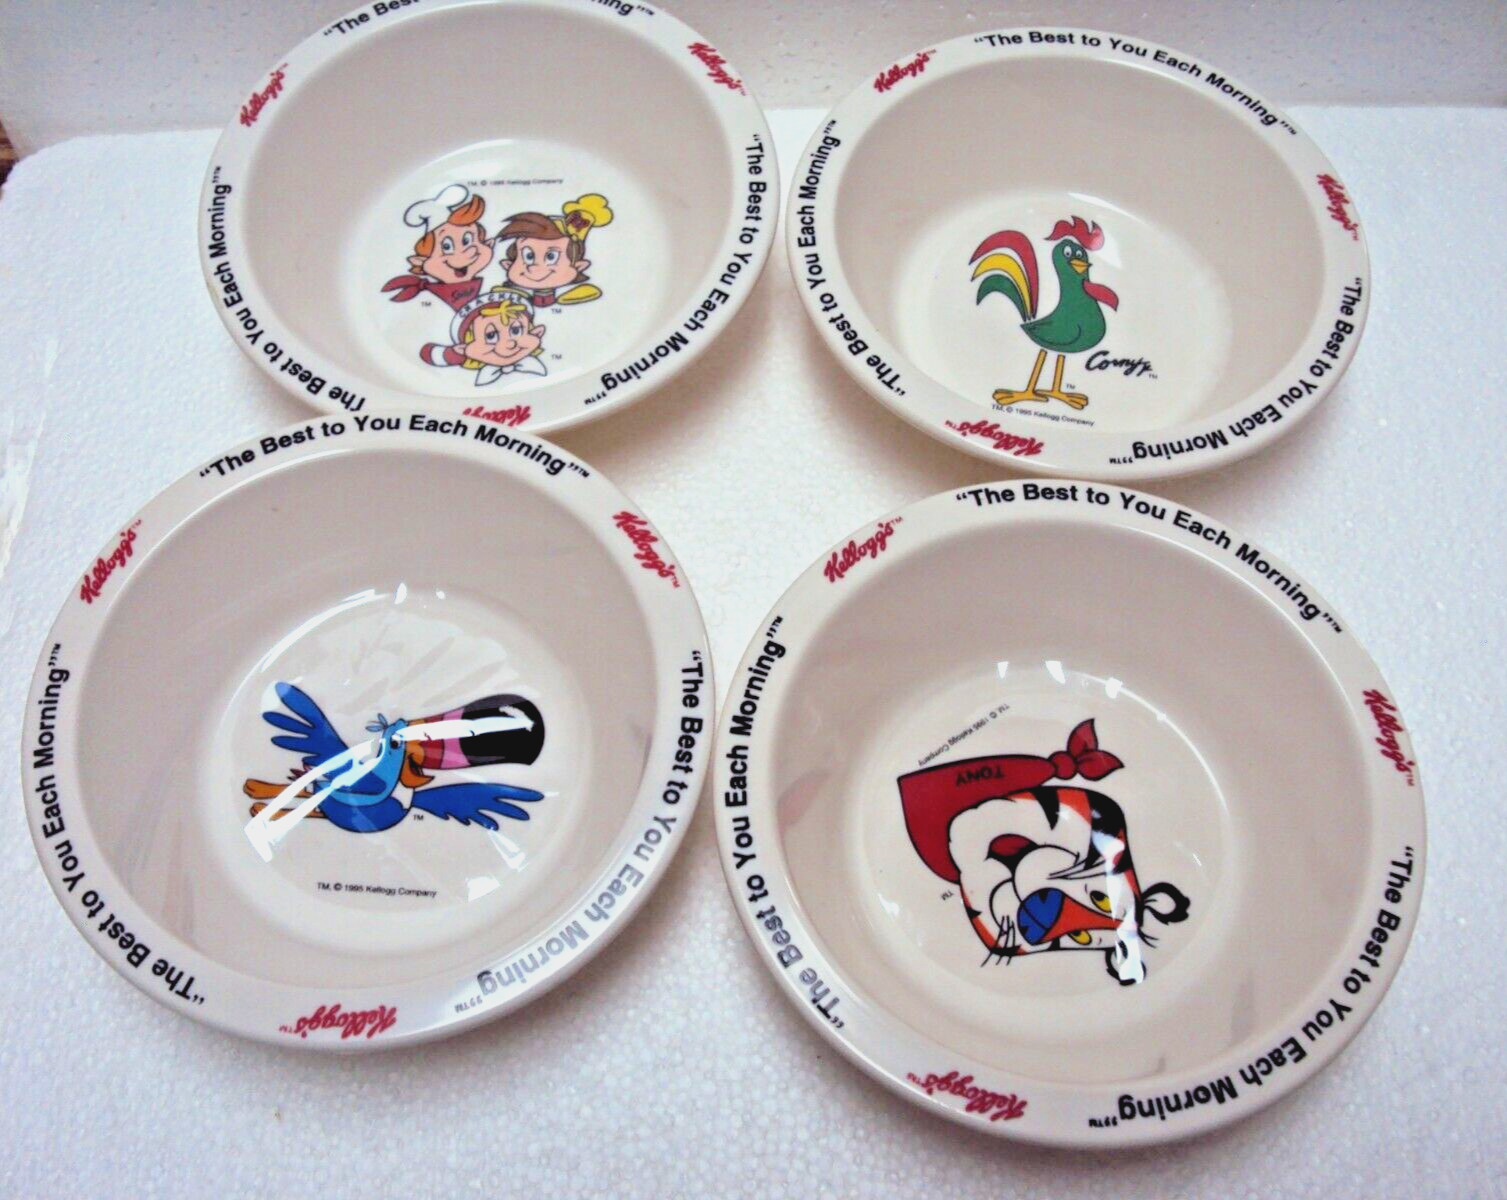 Vtg Kelloggs 1995 Cereal Bowls Set of 4 New Condition